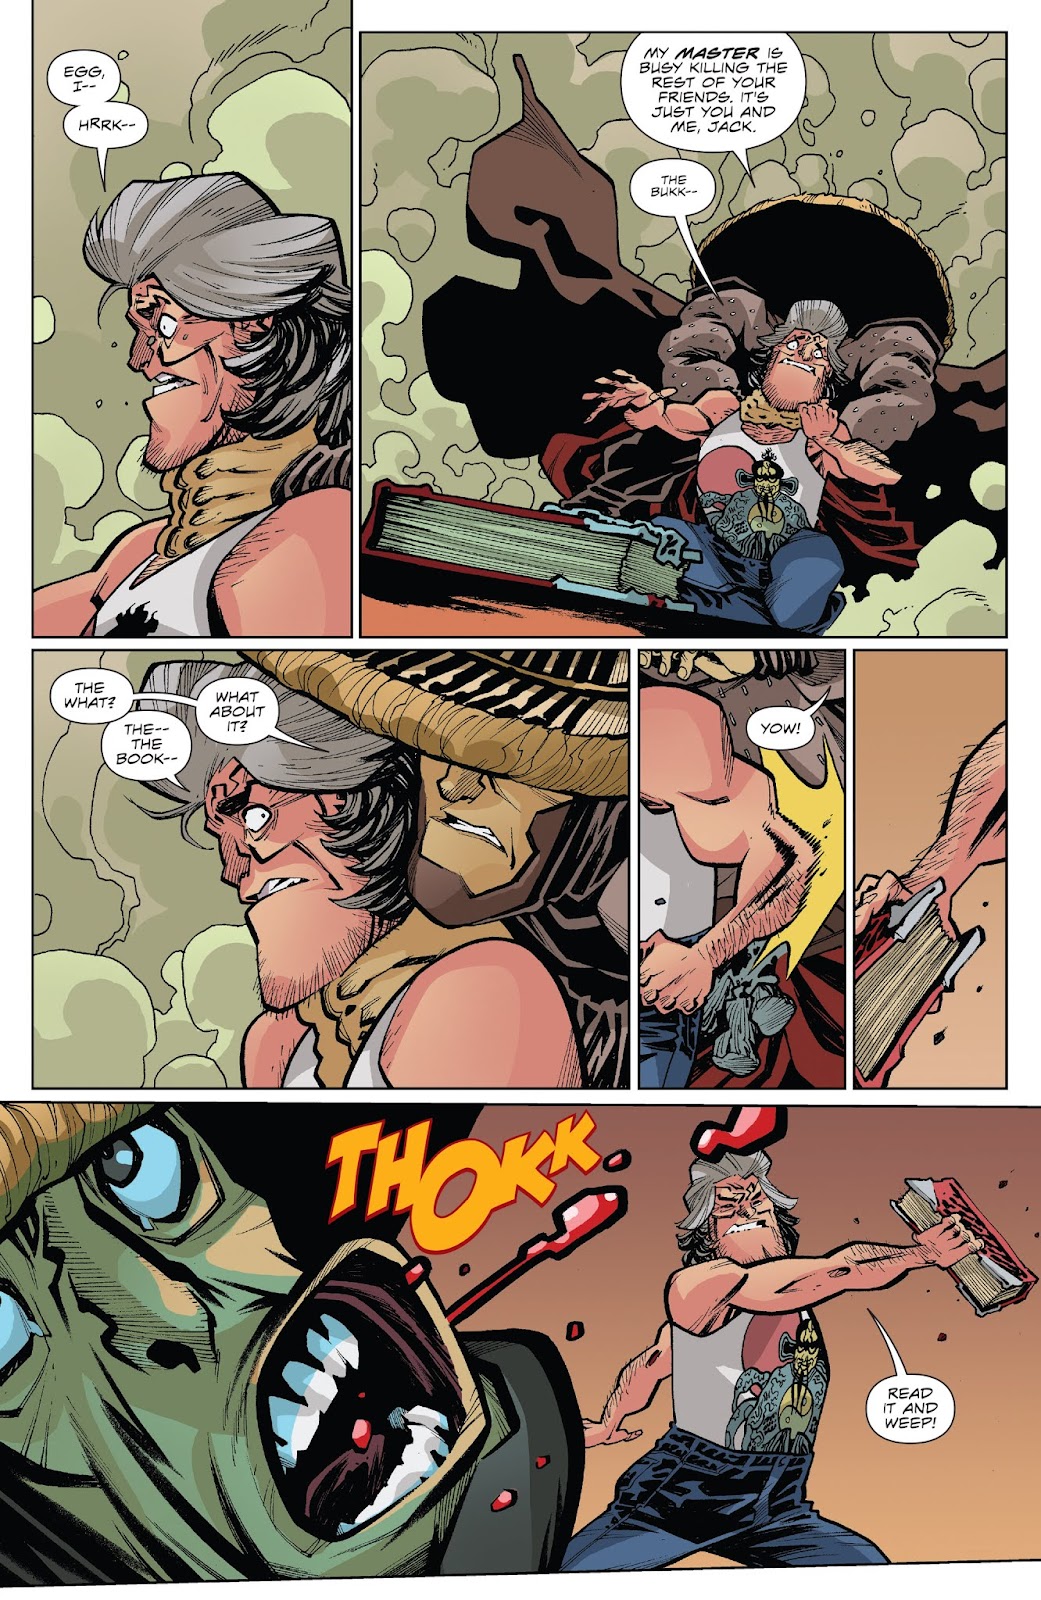 Big Trouble in Little China: Old Man Jack issue 9 - Page 17